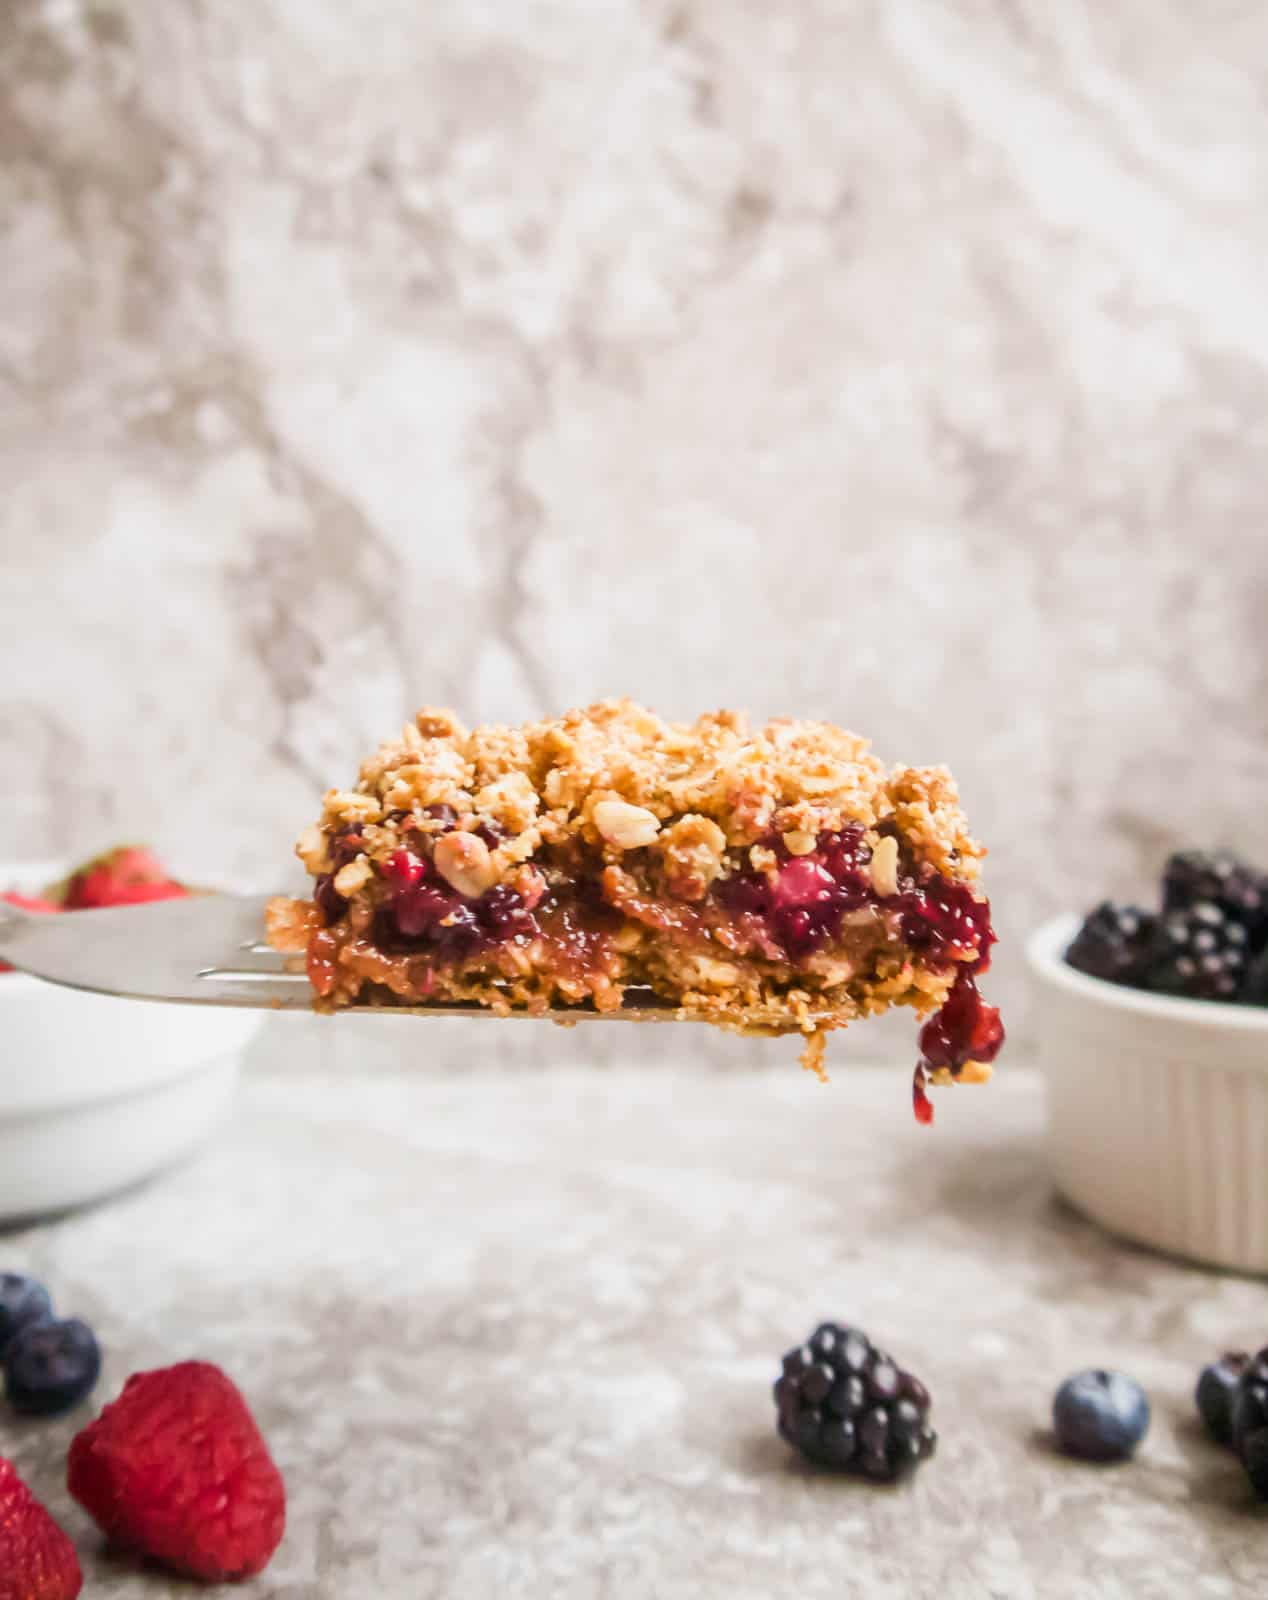 A slice of a berry oat bar being lifted out of the pan.